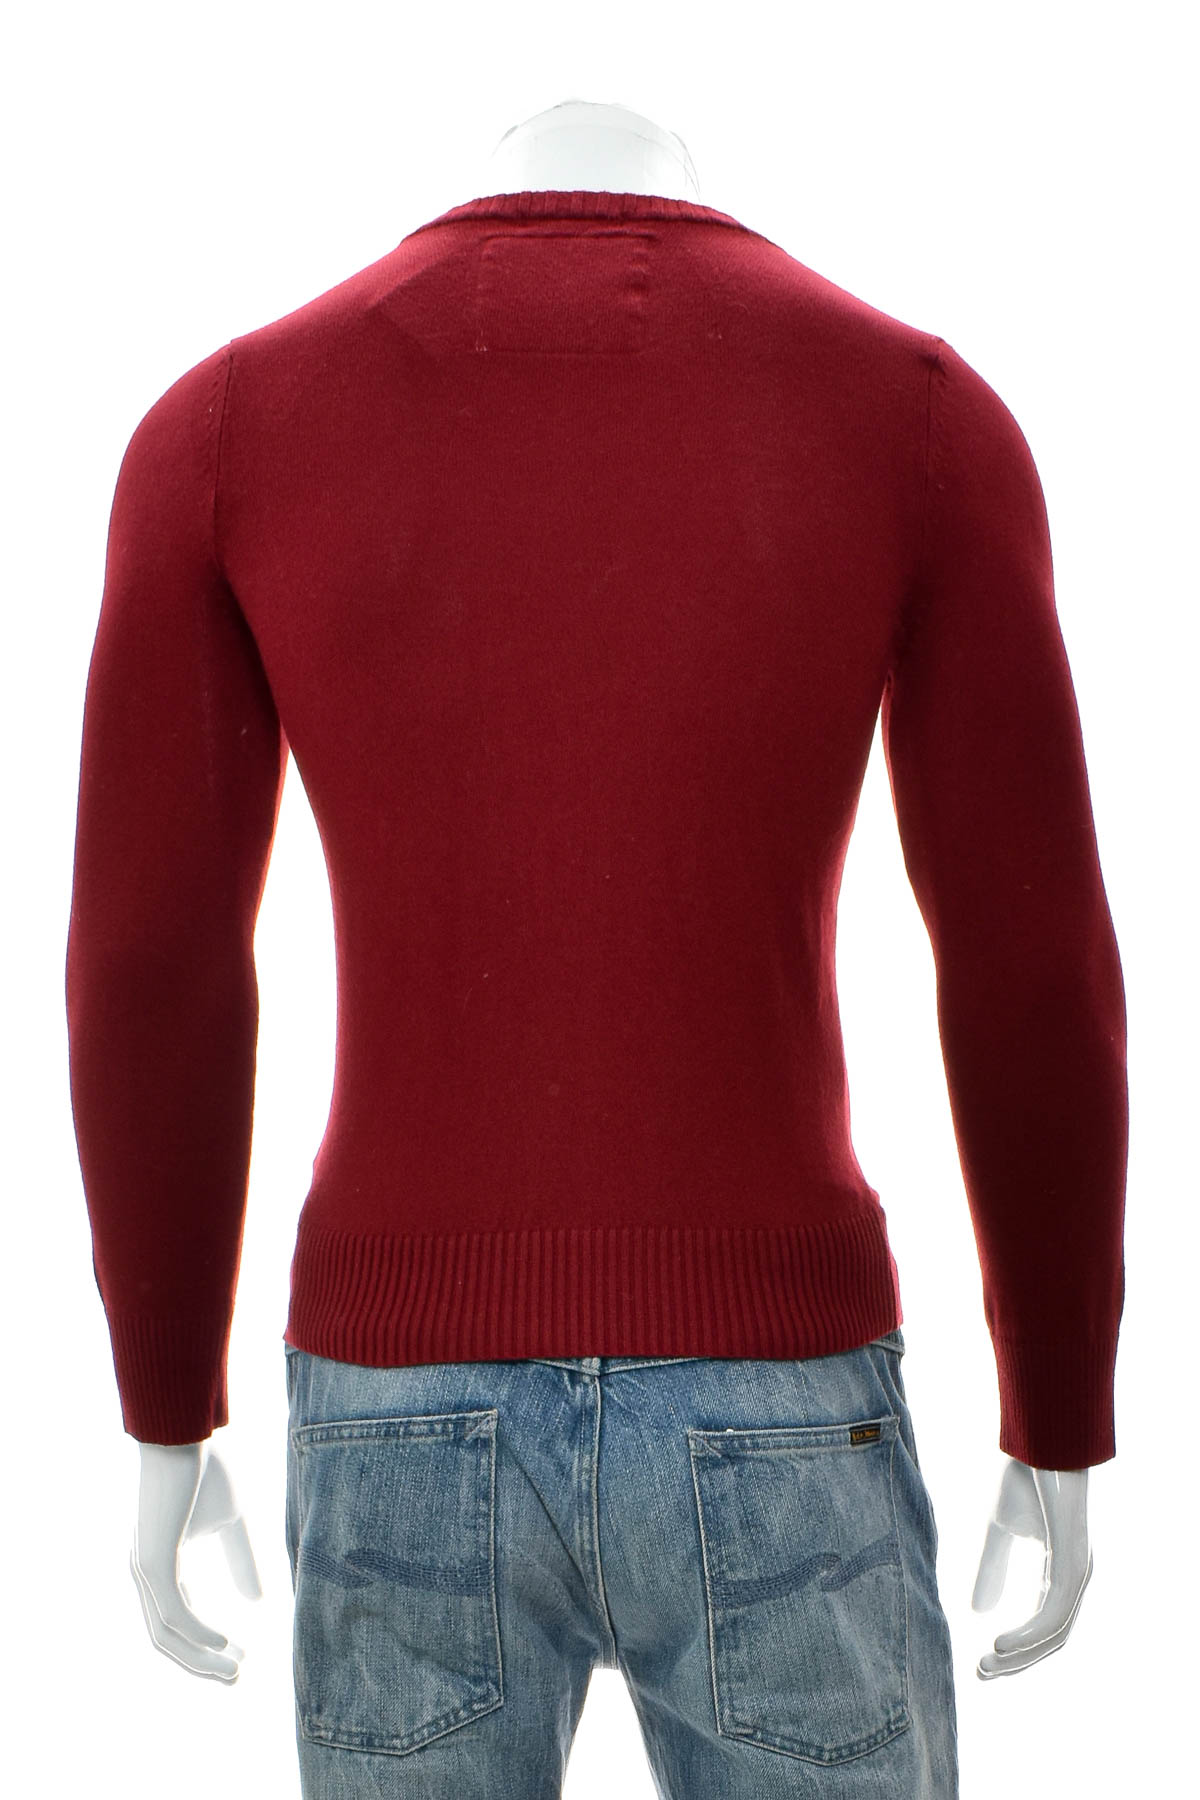 Men's sweater - Abercrombie & Fitch - 1